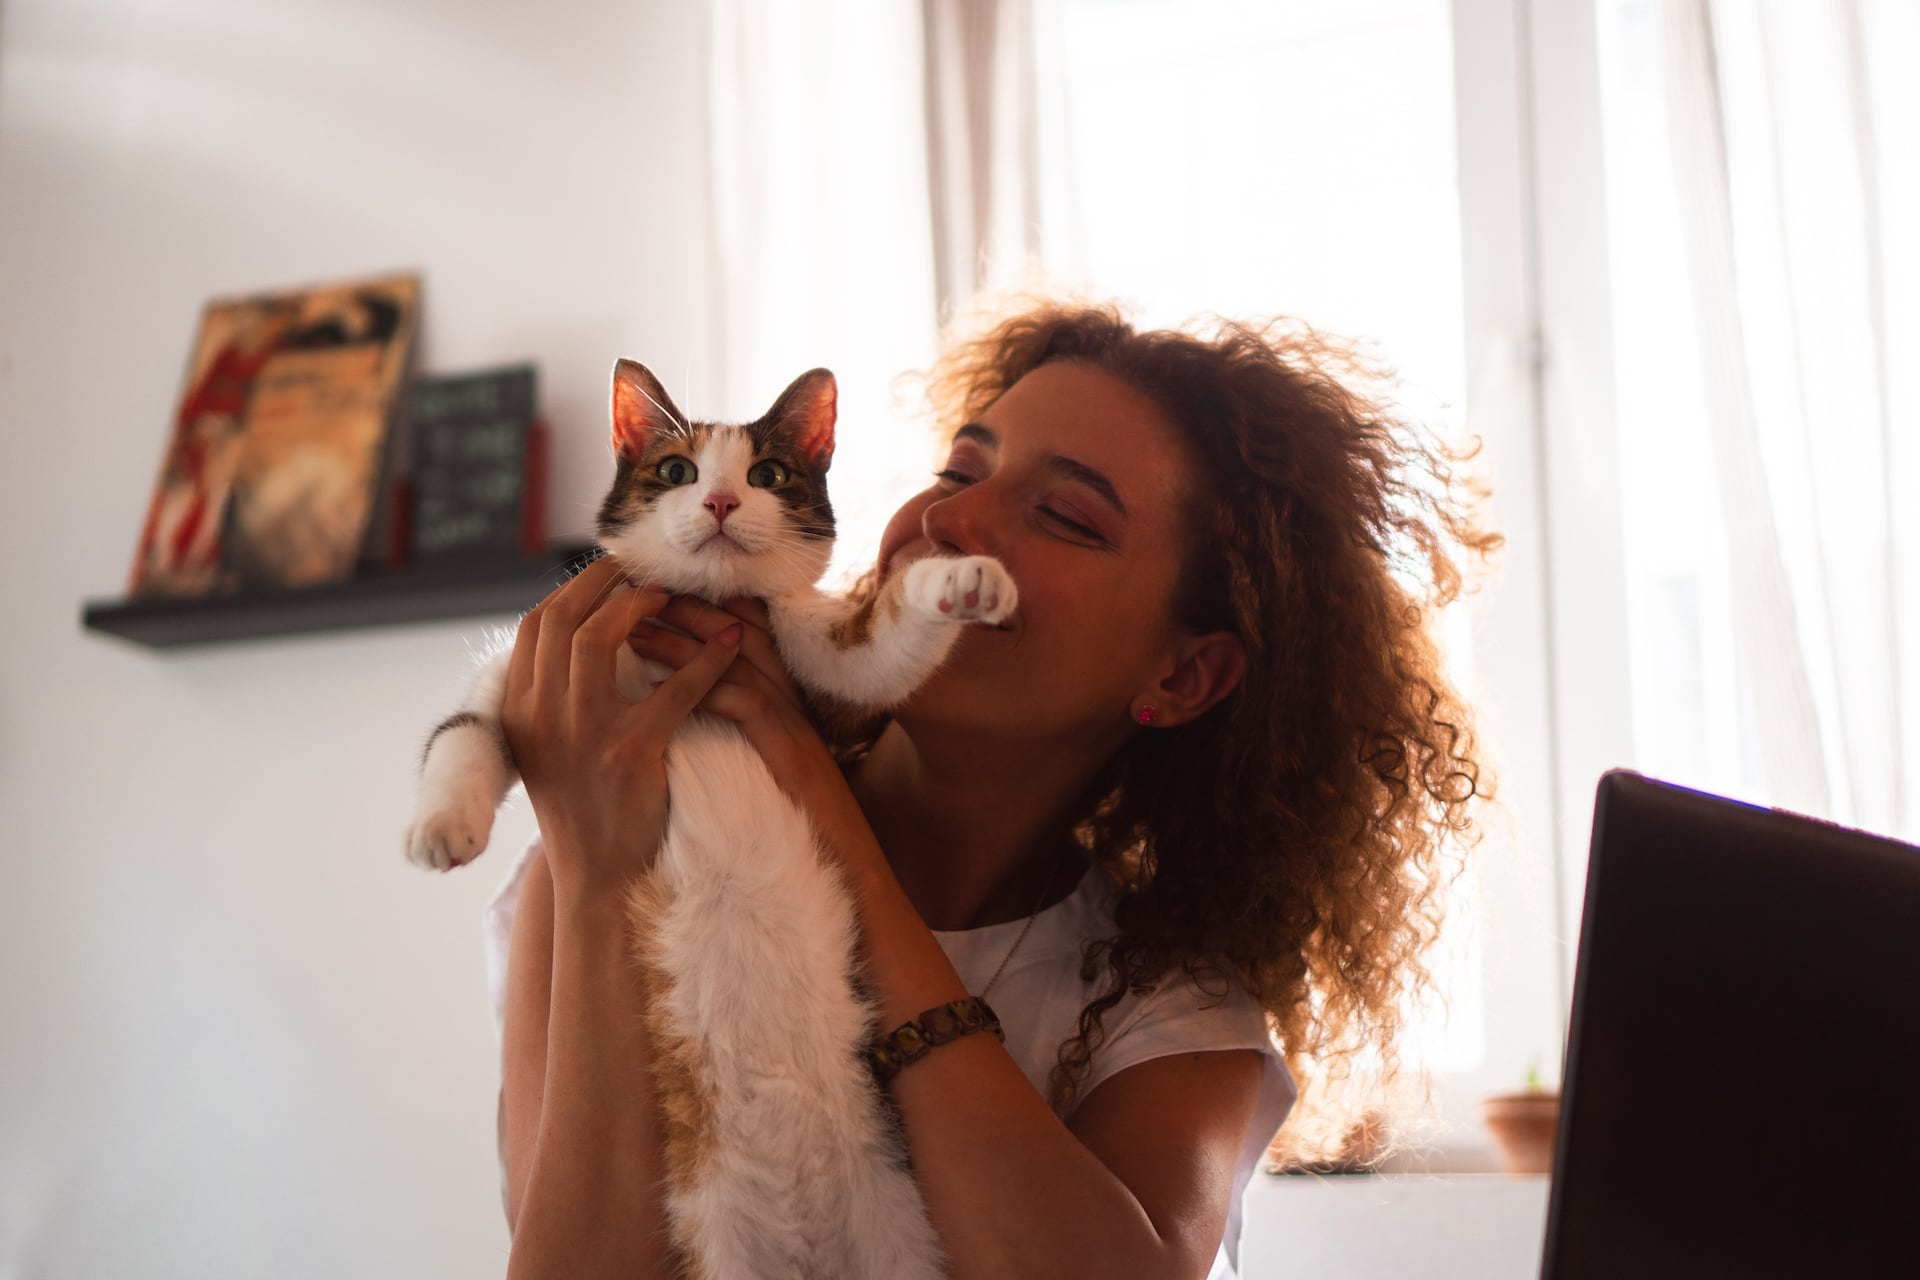 Woman smiling playing and holding cat